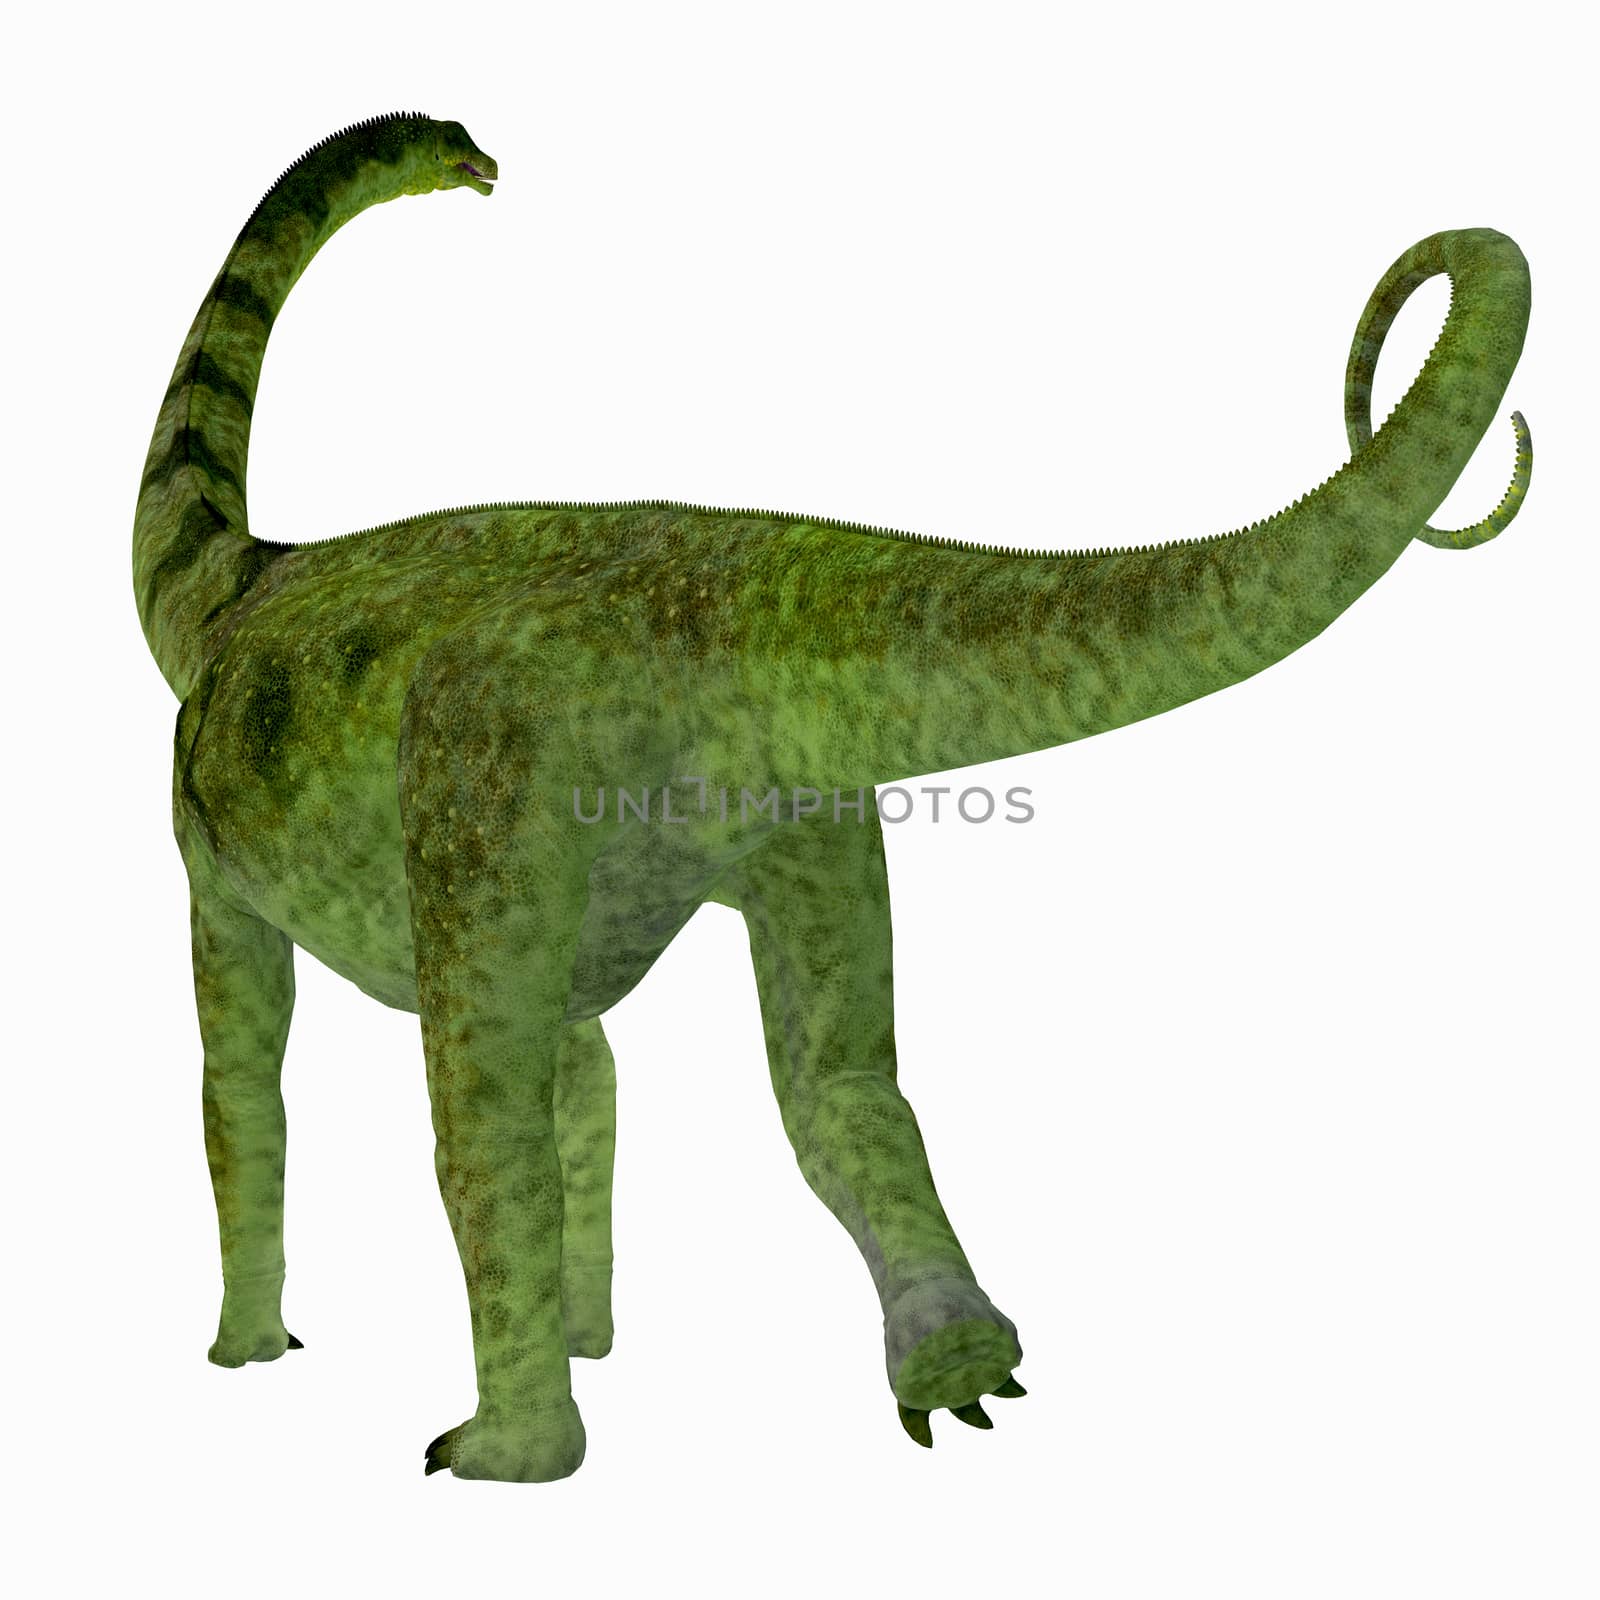 Puertasaurus was a herbivorous sauropod dinosaur that lived in Patagonia in the Cretaceous Period.